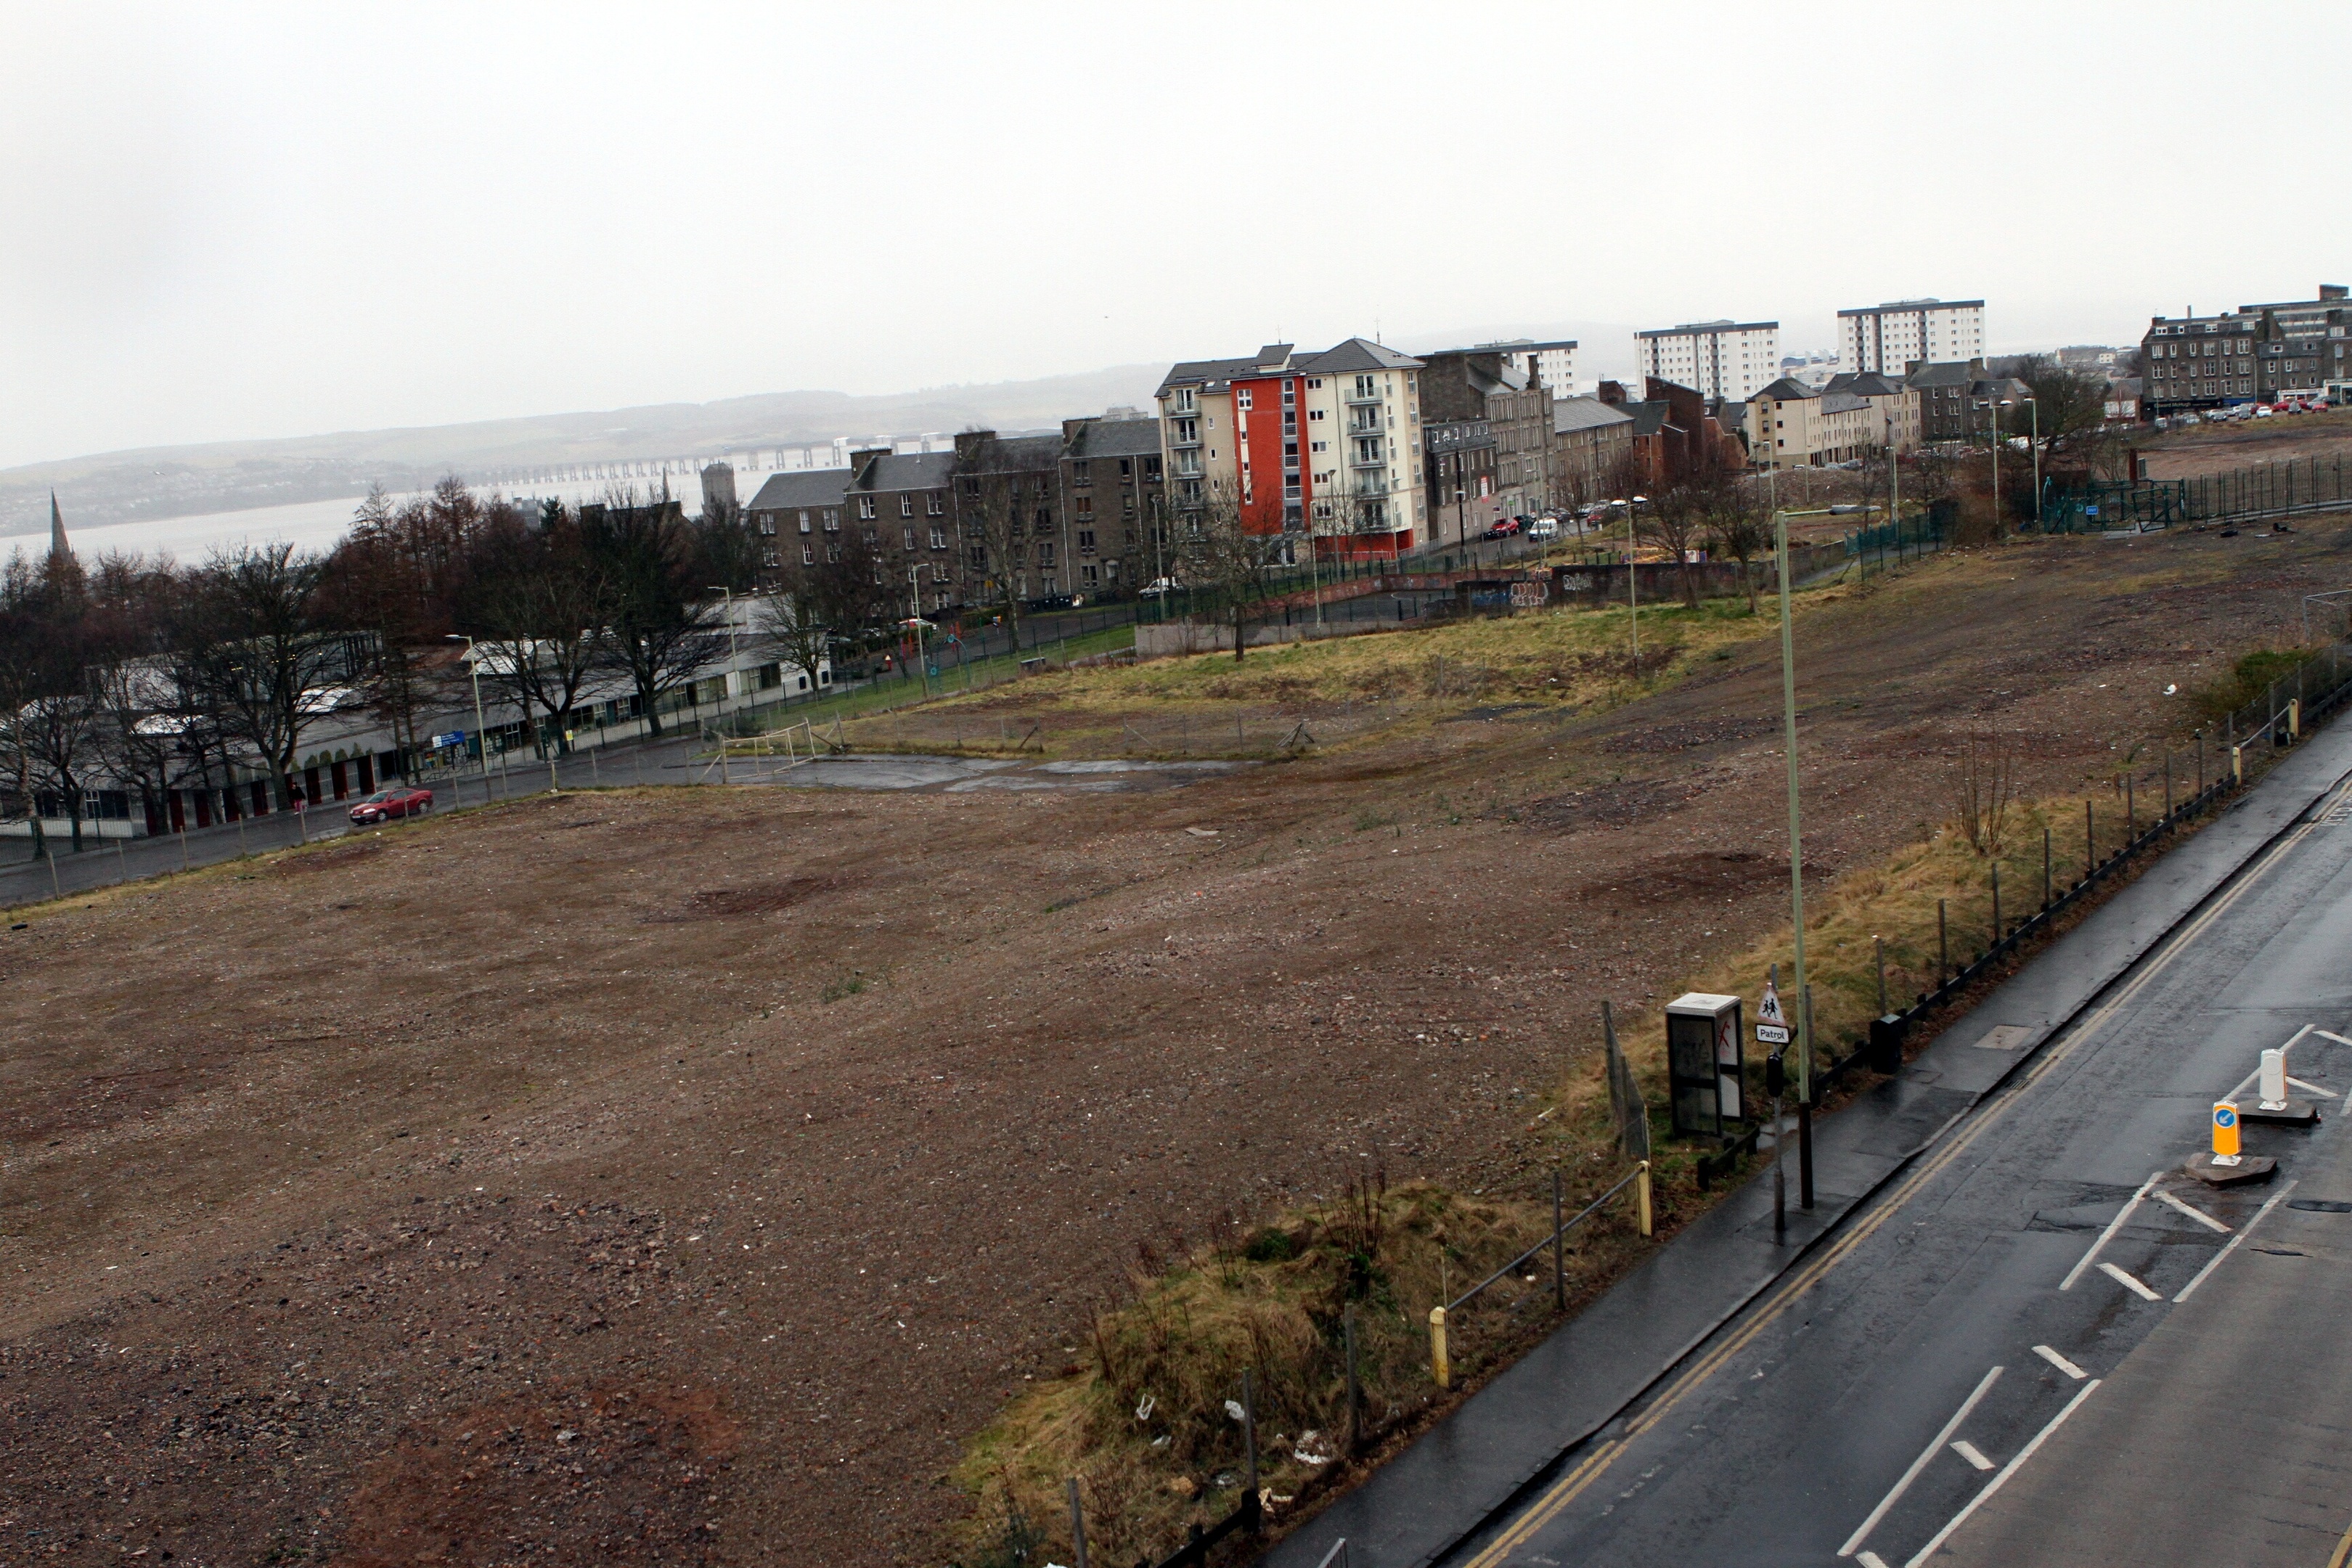 81 new homes will be built on the site once occupied by the Alexander Street multis.